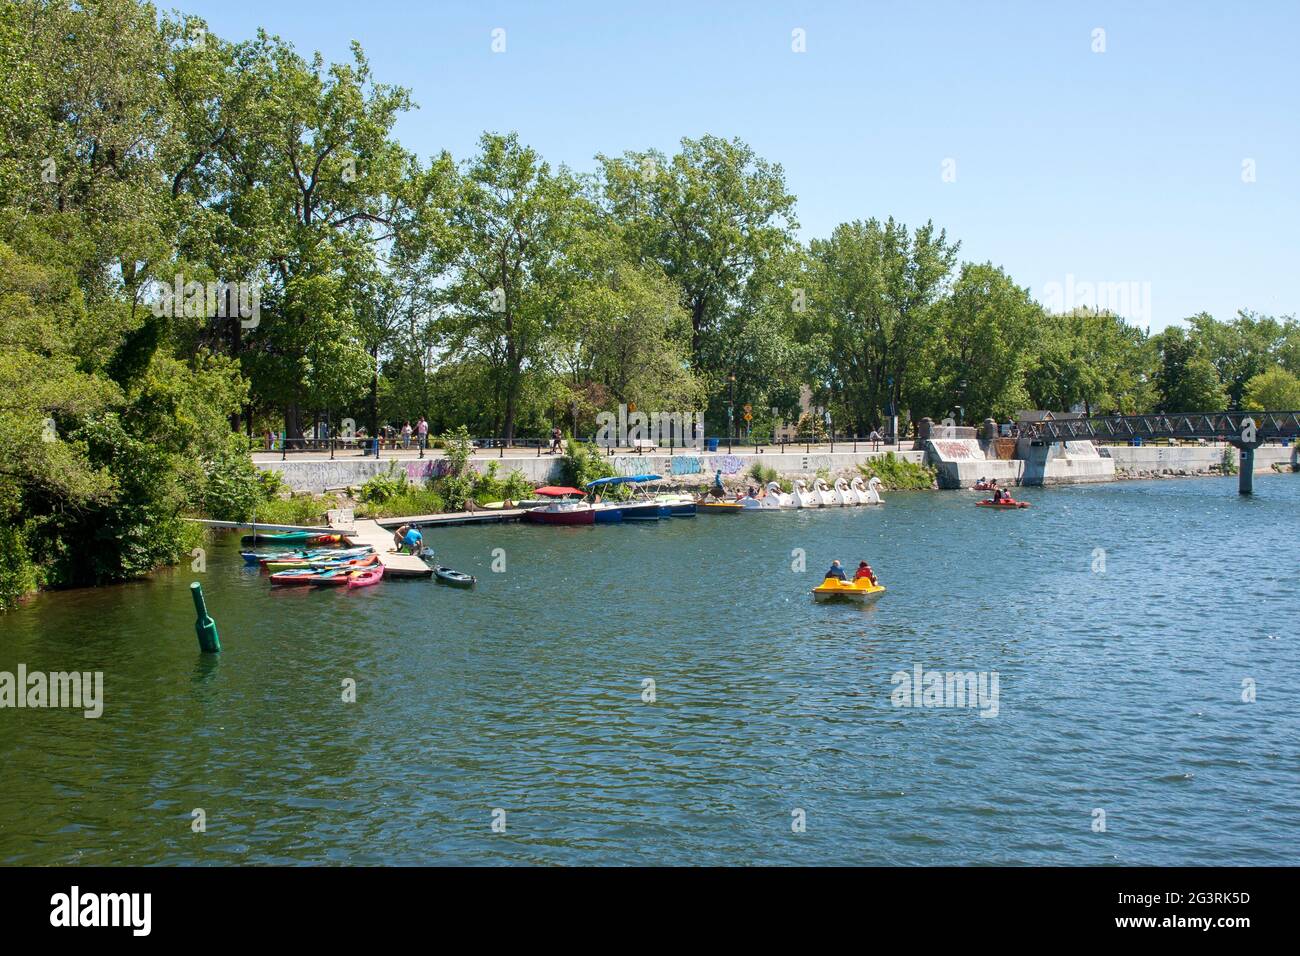 Boat rental dock on the Lachine Canal near Montreal's Atwater Market Stock Photo